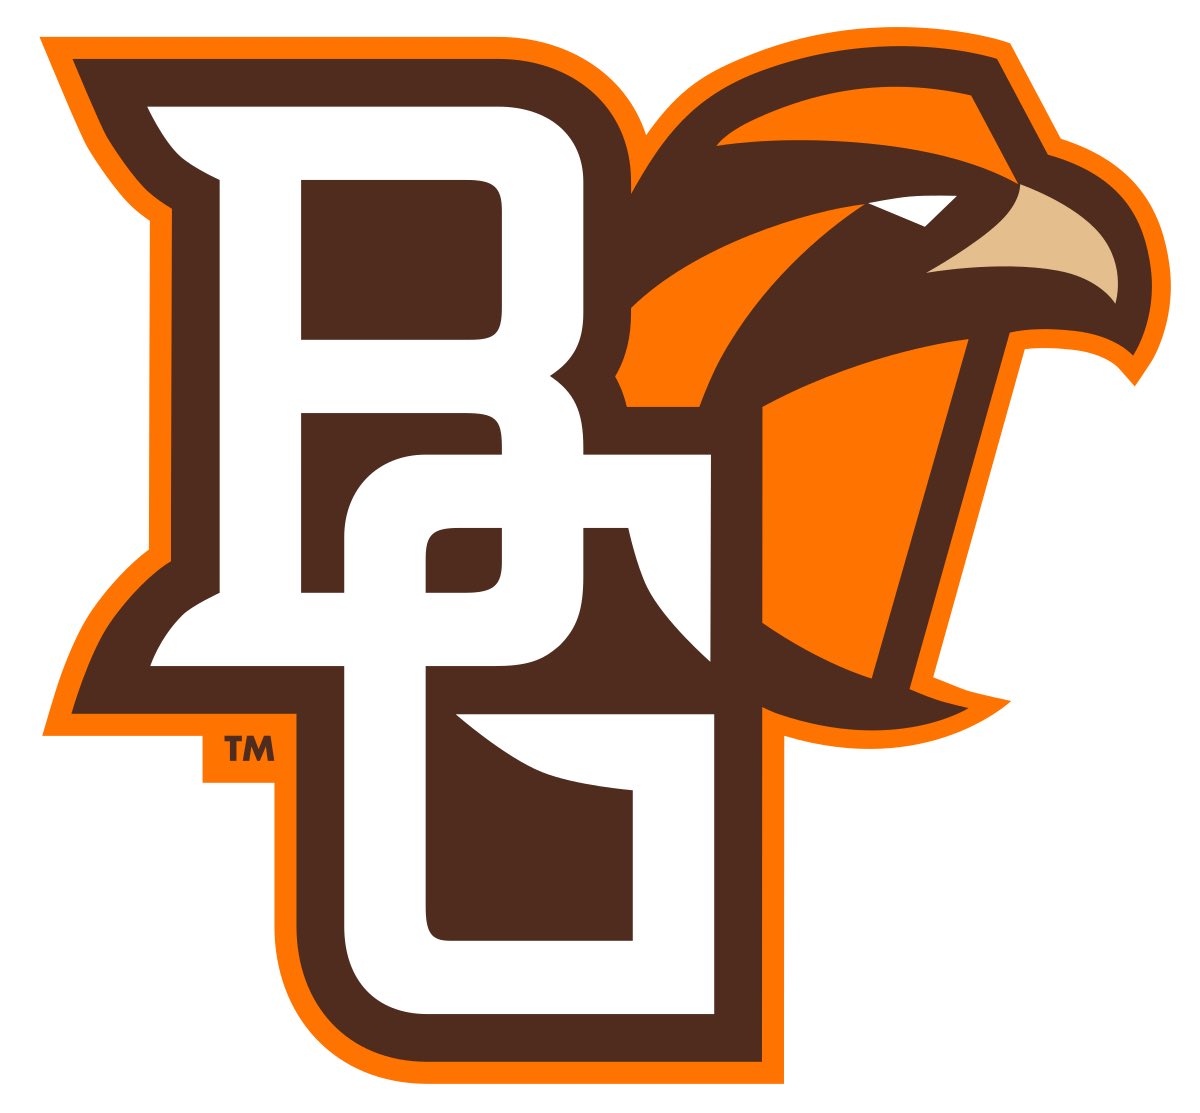 After great conversation with @CoachBeyRasool I’m blessed to receive my 2nd D1 offer from @BG_Football @D_TKelly @saguarofootball